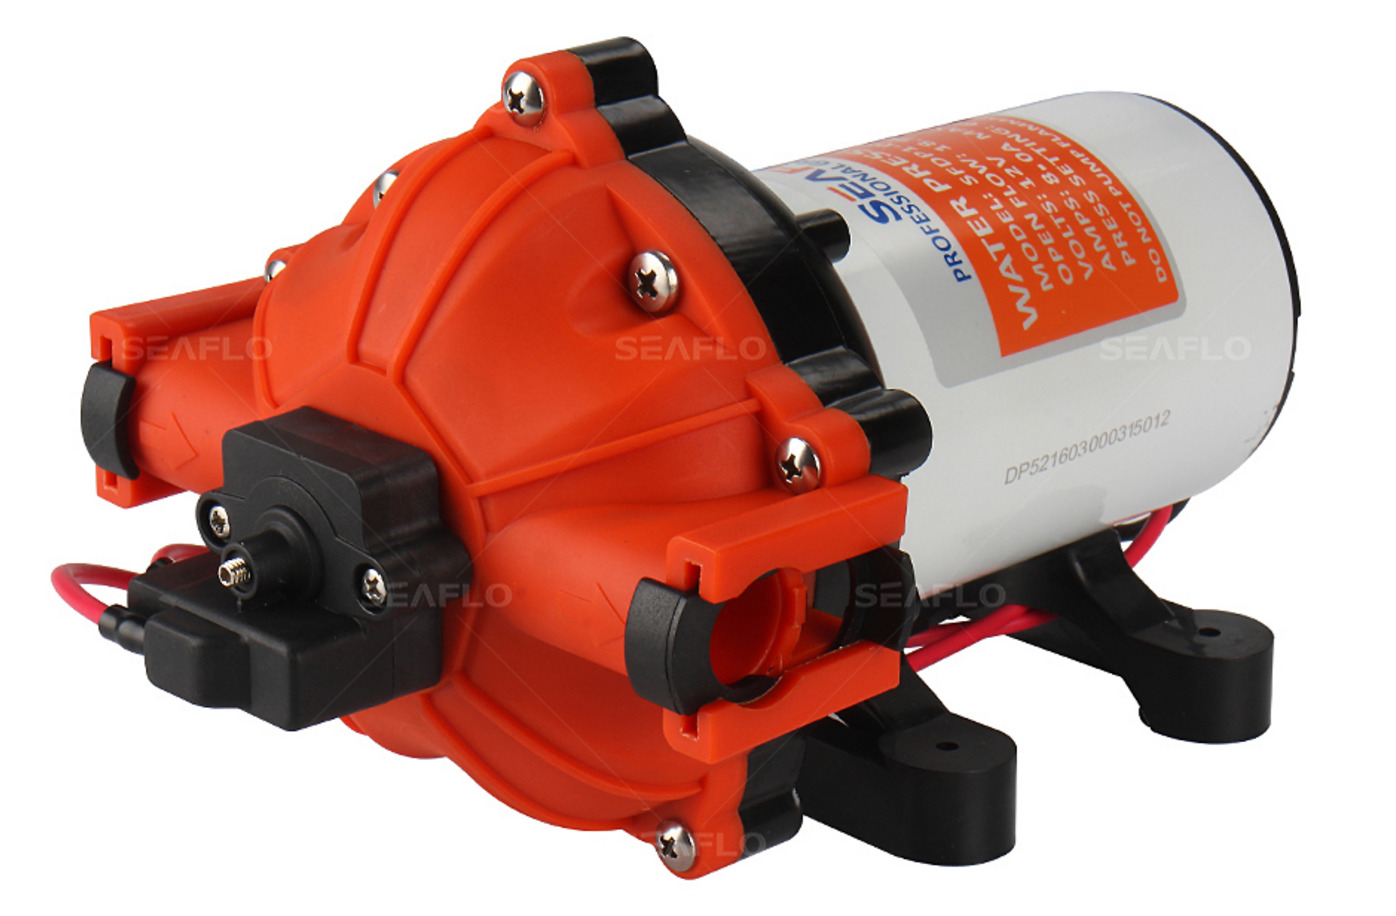 NEW SEAFLO 12v DC 5.0 GPM 60 PSI Water Pressure Pump w/ Quick-Connect Fittings